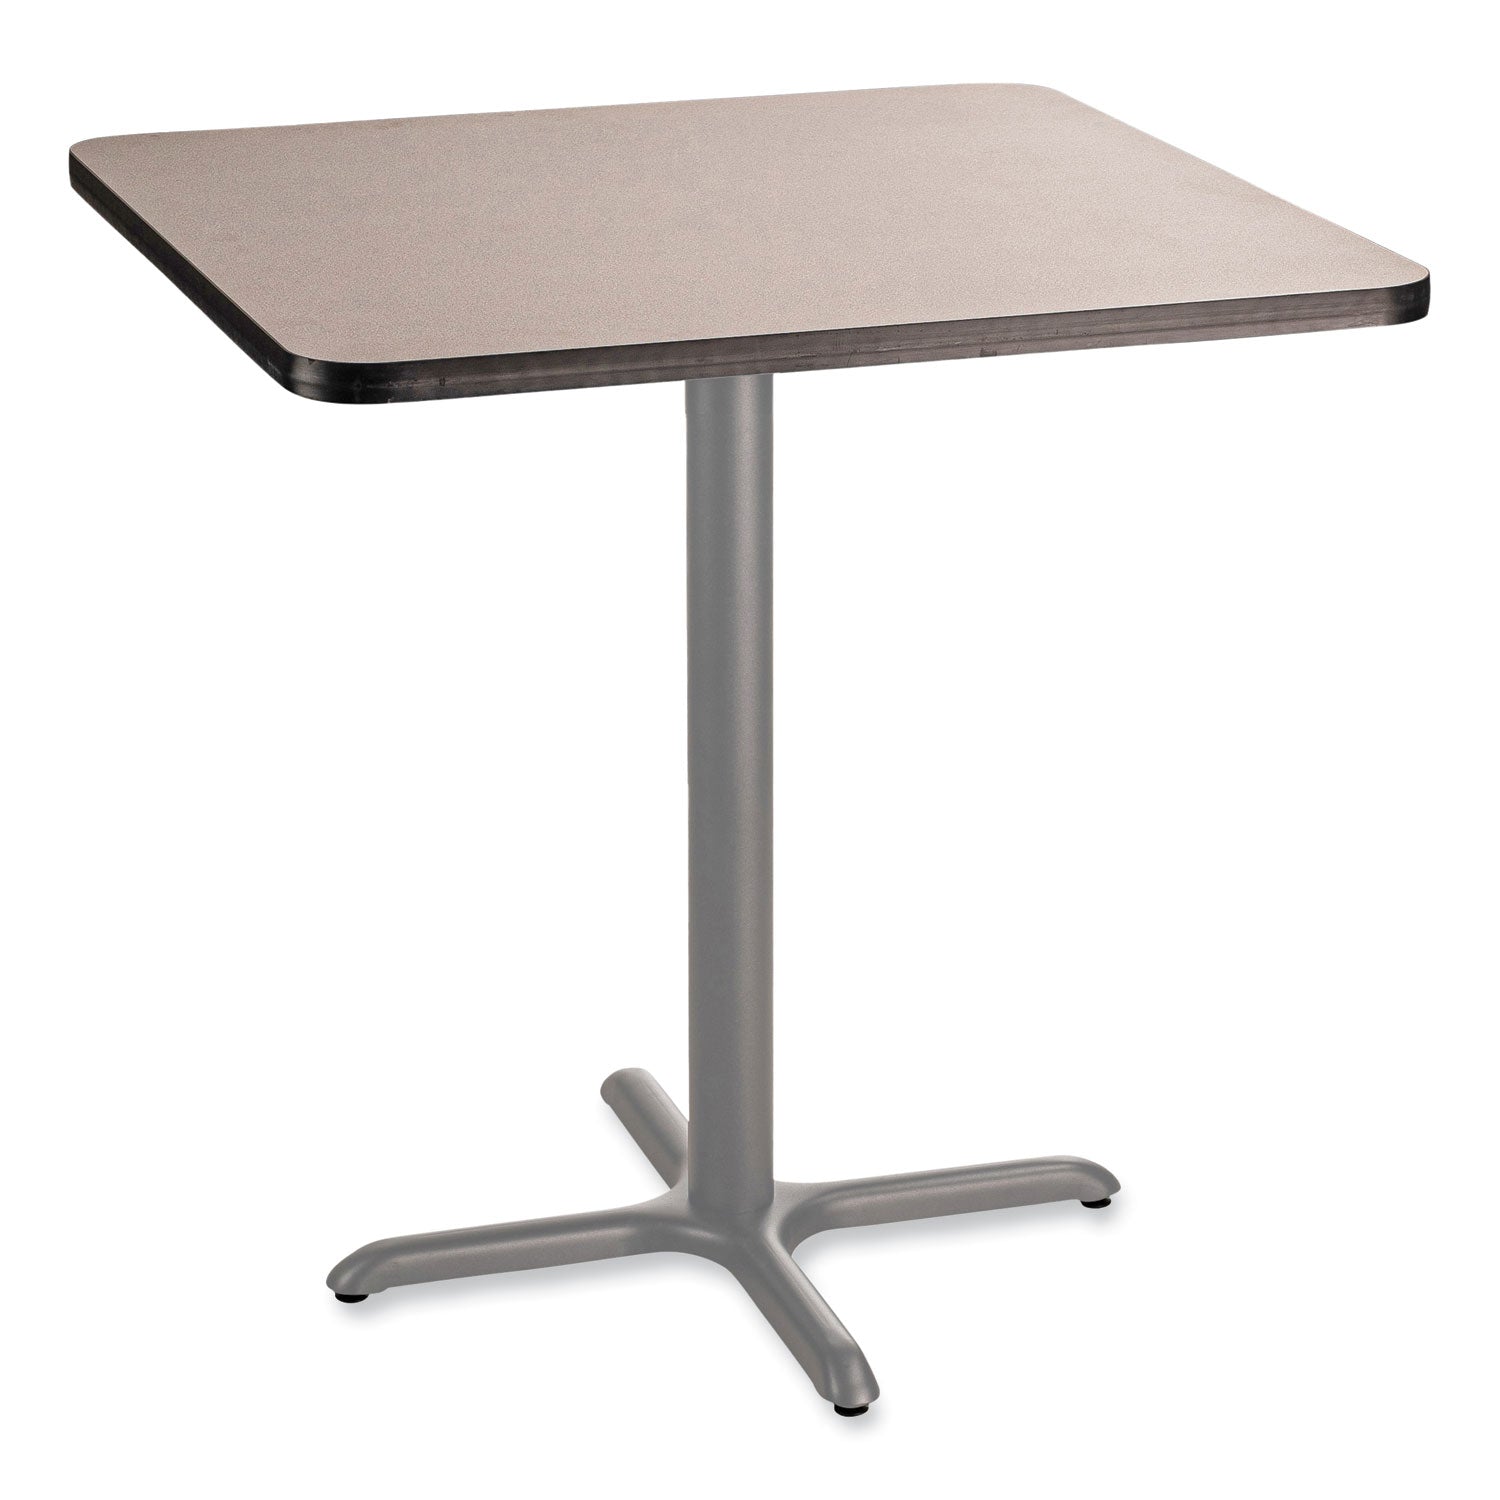 cafe-table-36w-x-36d-x-36h-square-top-x-base-gray-nebula-top-gray-base-ships-in-7-10-business-days_npscg33636xc1gy - 1